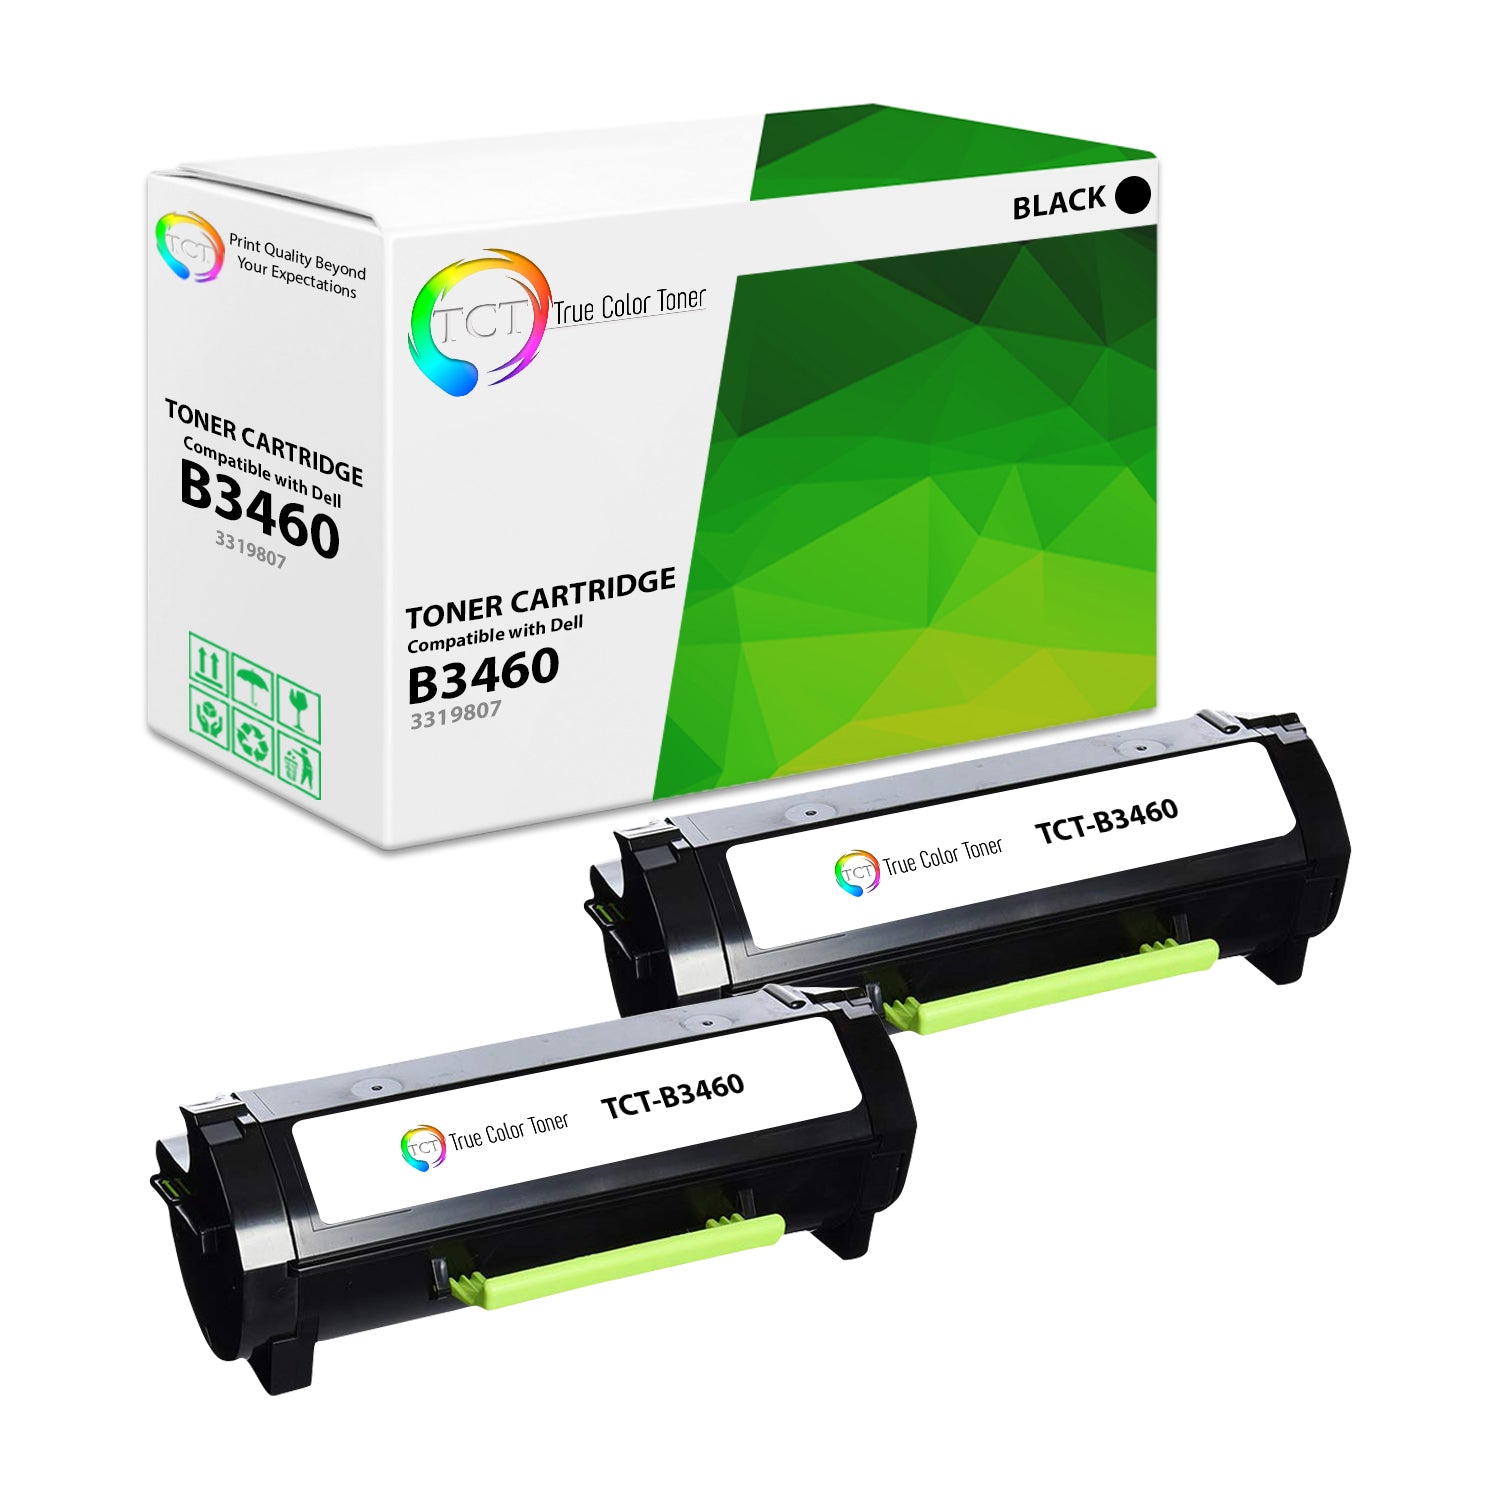 TCT Compatible Extra High Yield Toner Cartridge Replacement for the Dell B3460 Series - 2 Pack Black